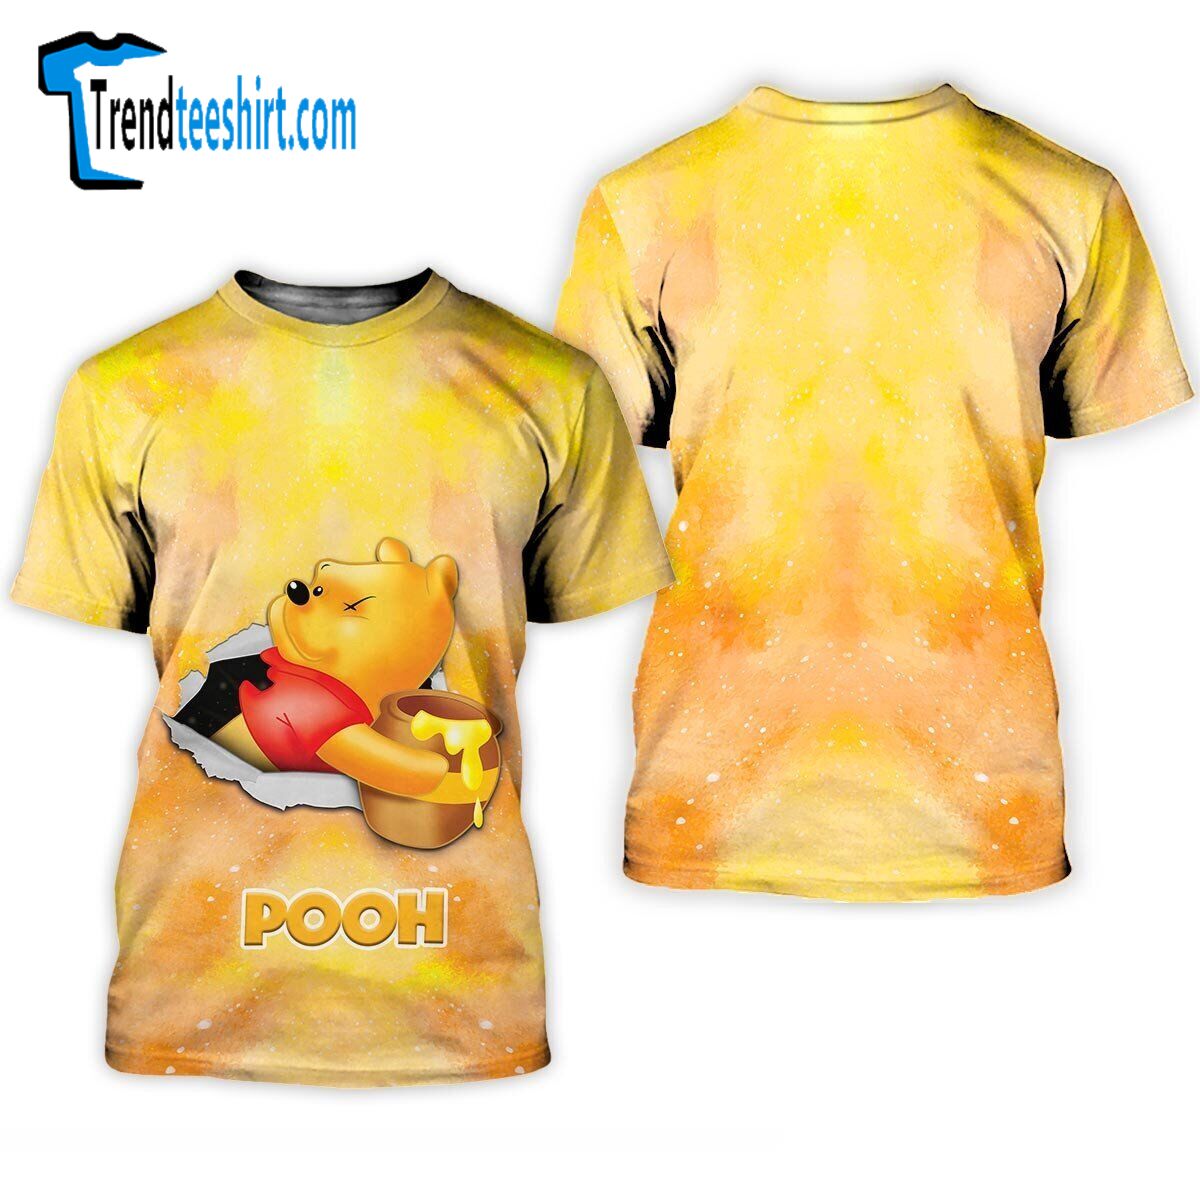 Pooh Cracking Galaxy Pattern Mother's Day Birthday Tshirt 3d Printed